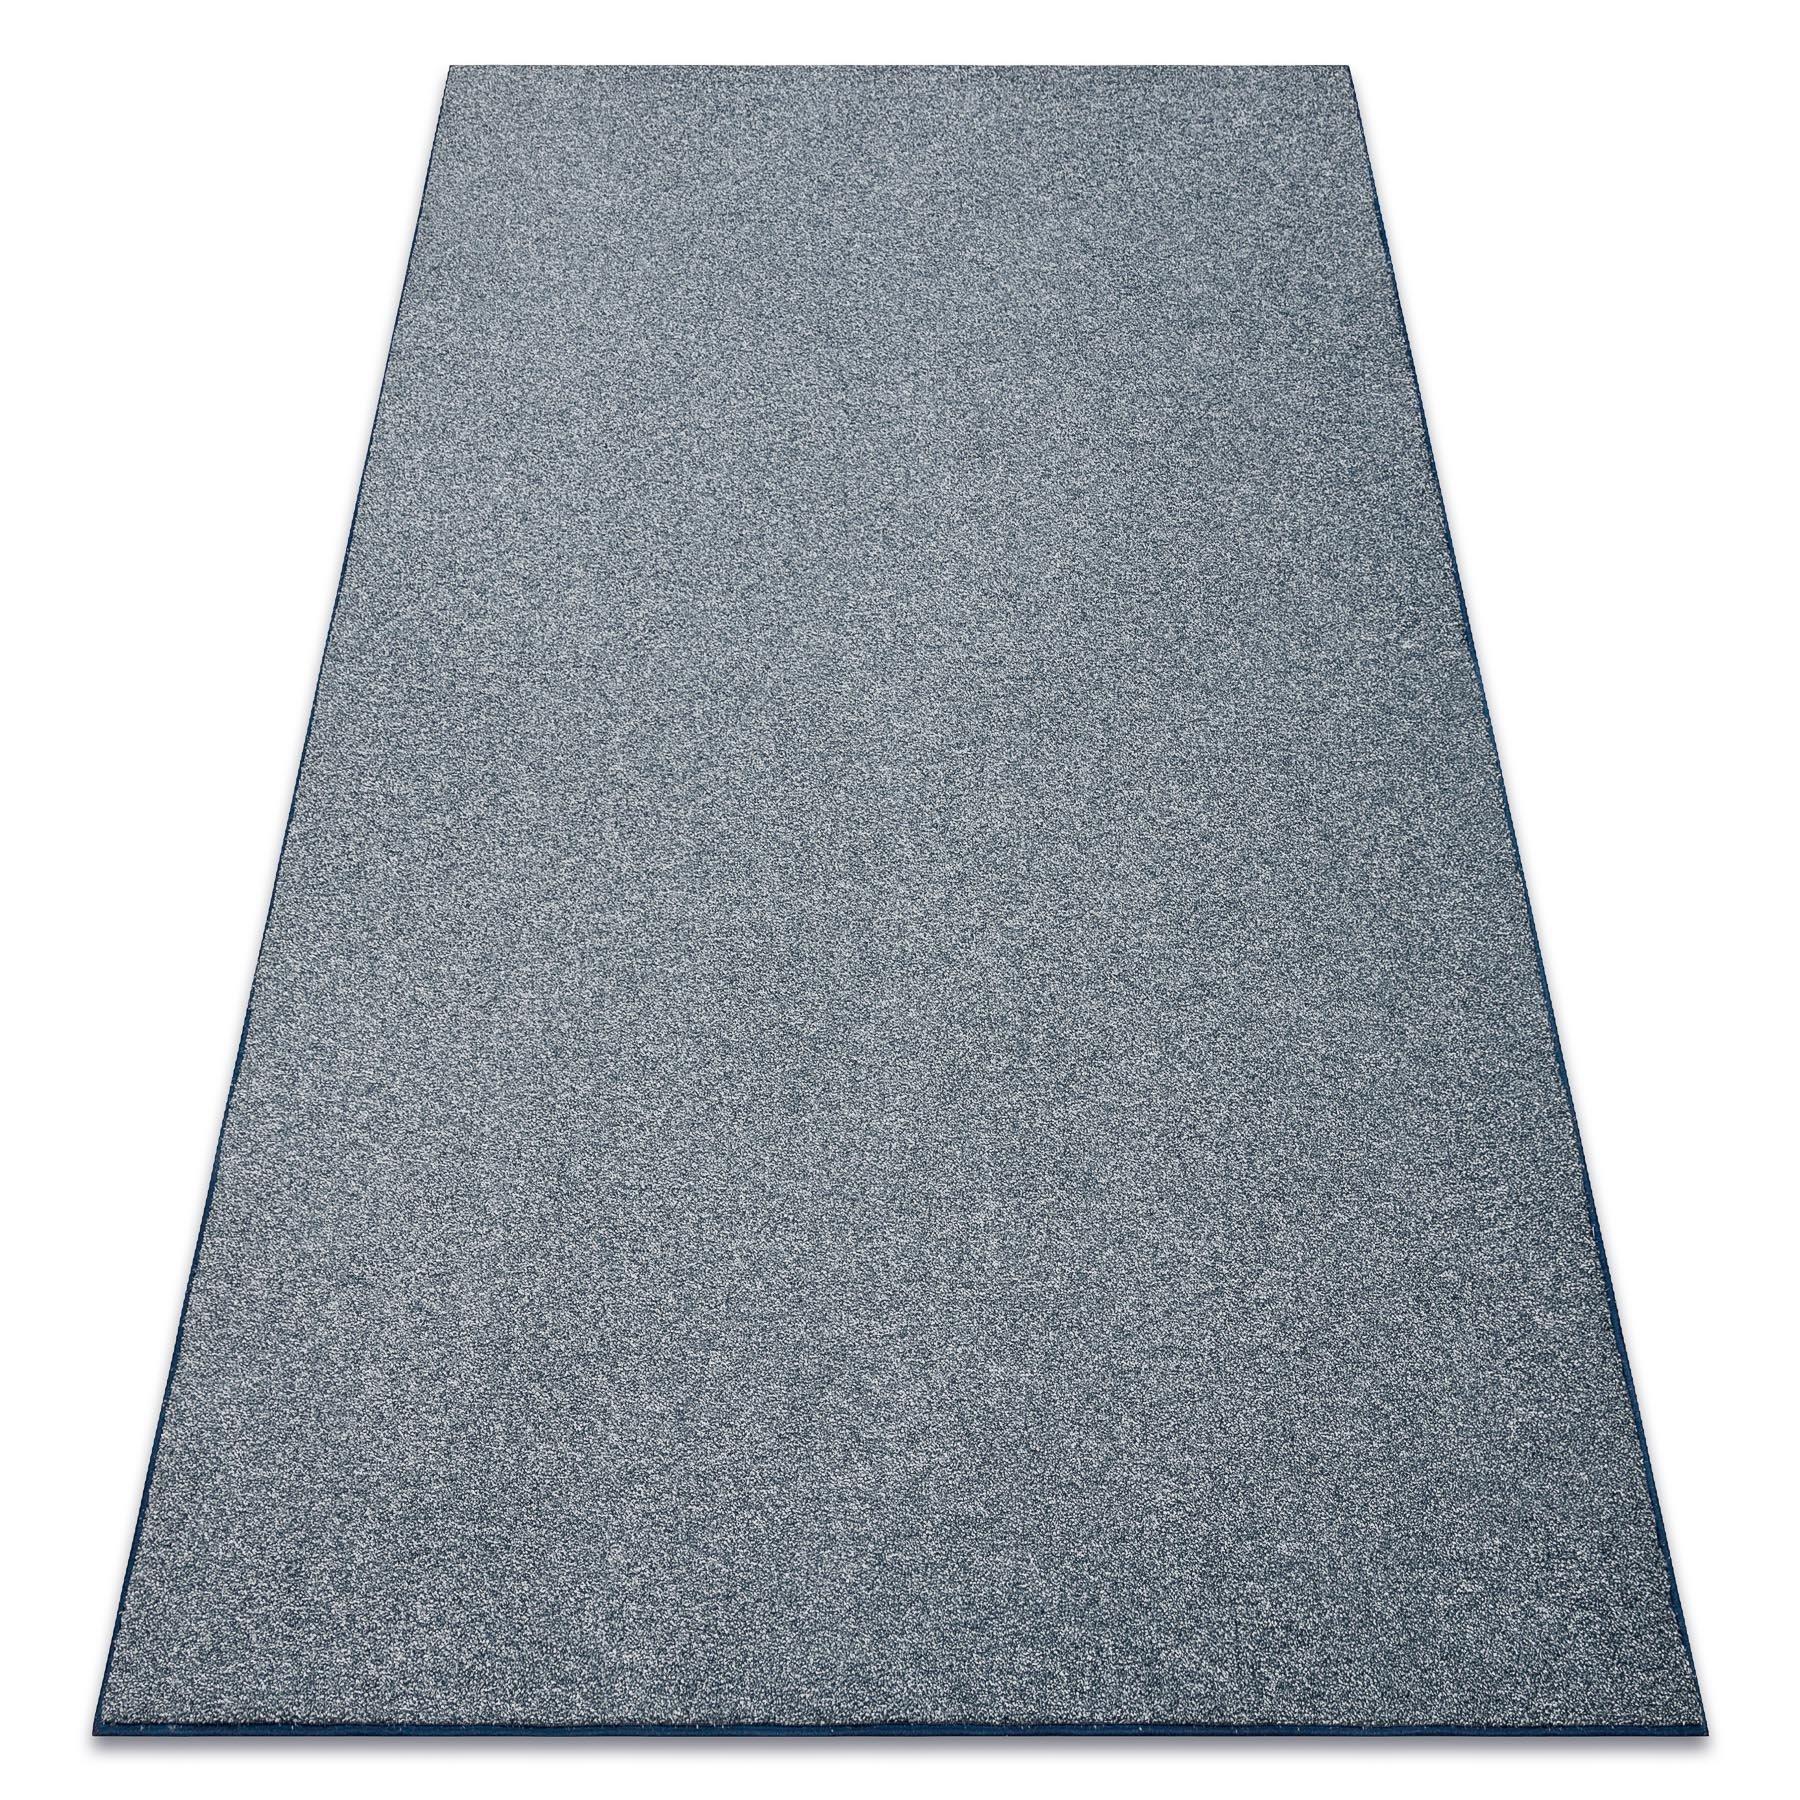 Wall-To-Wall Excellence Rug